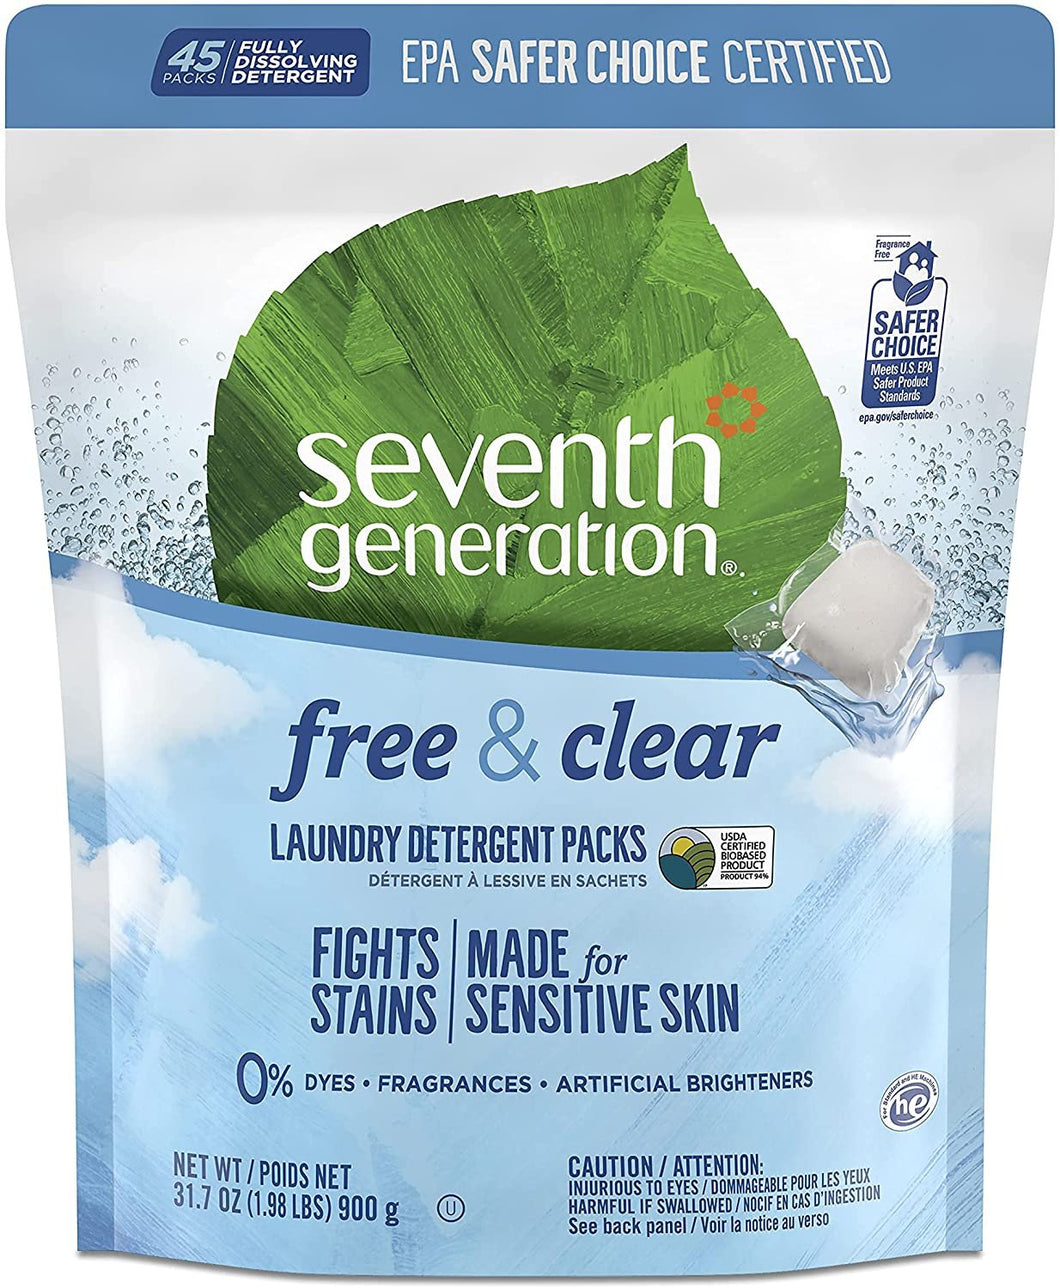 Laundary Detergent Packs, Built in Fabric Softner Enzymes, Free & Clear, Plant Derived, Fight Stains, No Dyes, For Sensitive Skin, Pack of 6, 45 Count Per Pack, 31.7 FL OZ Per Pack,